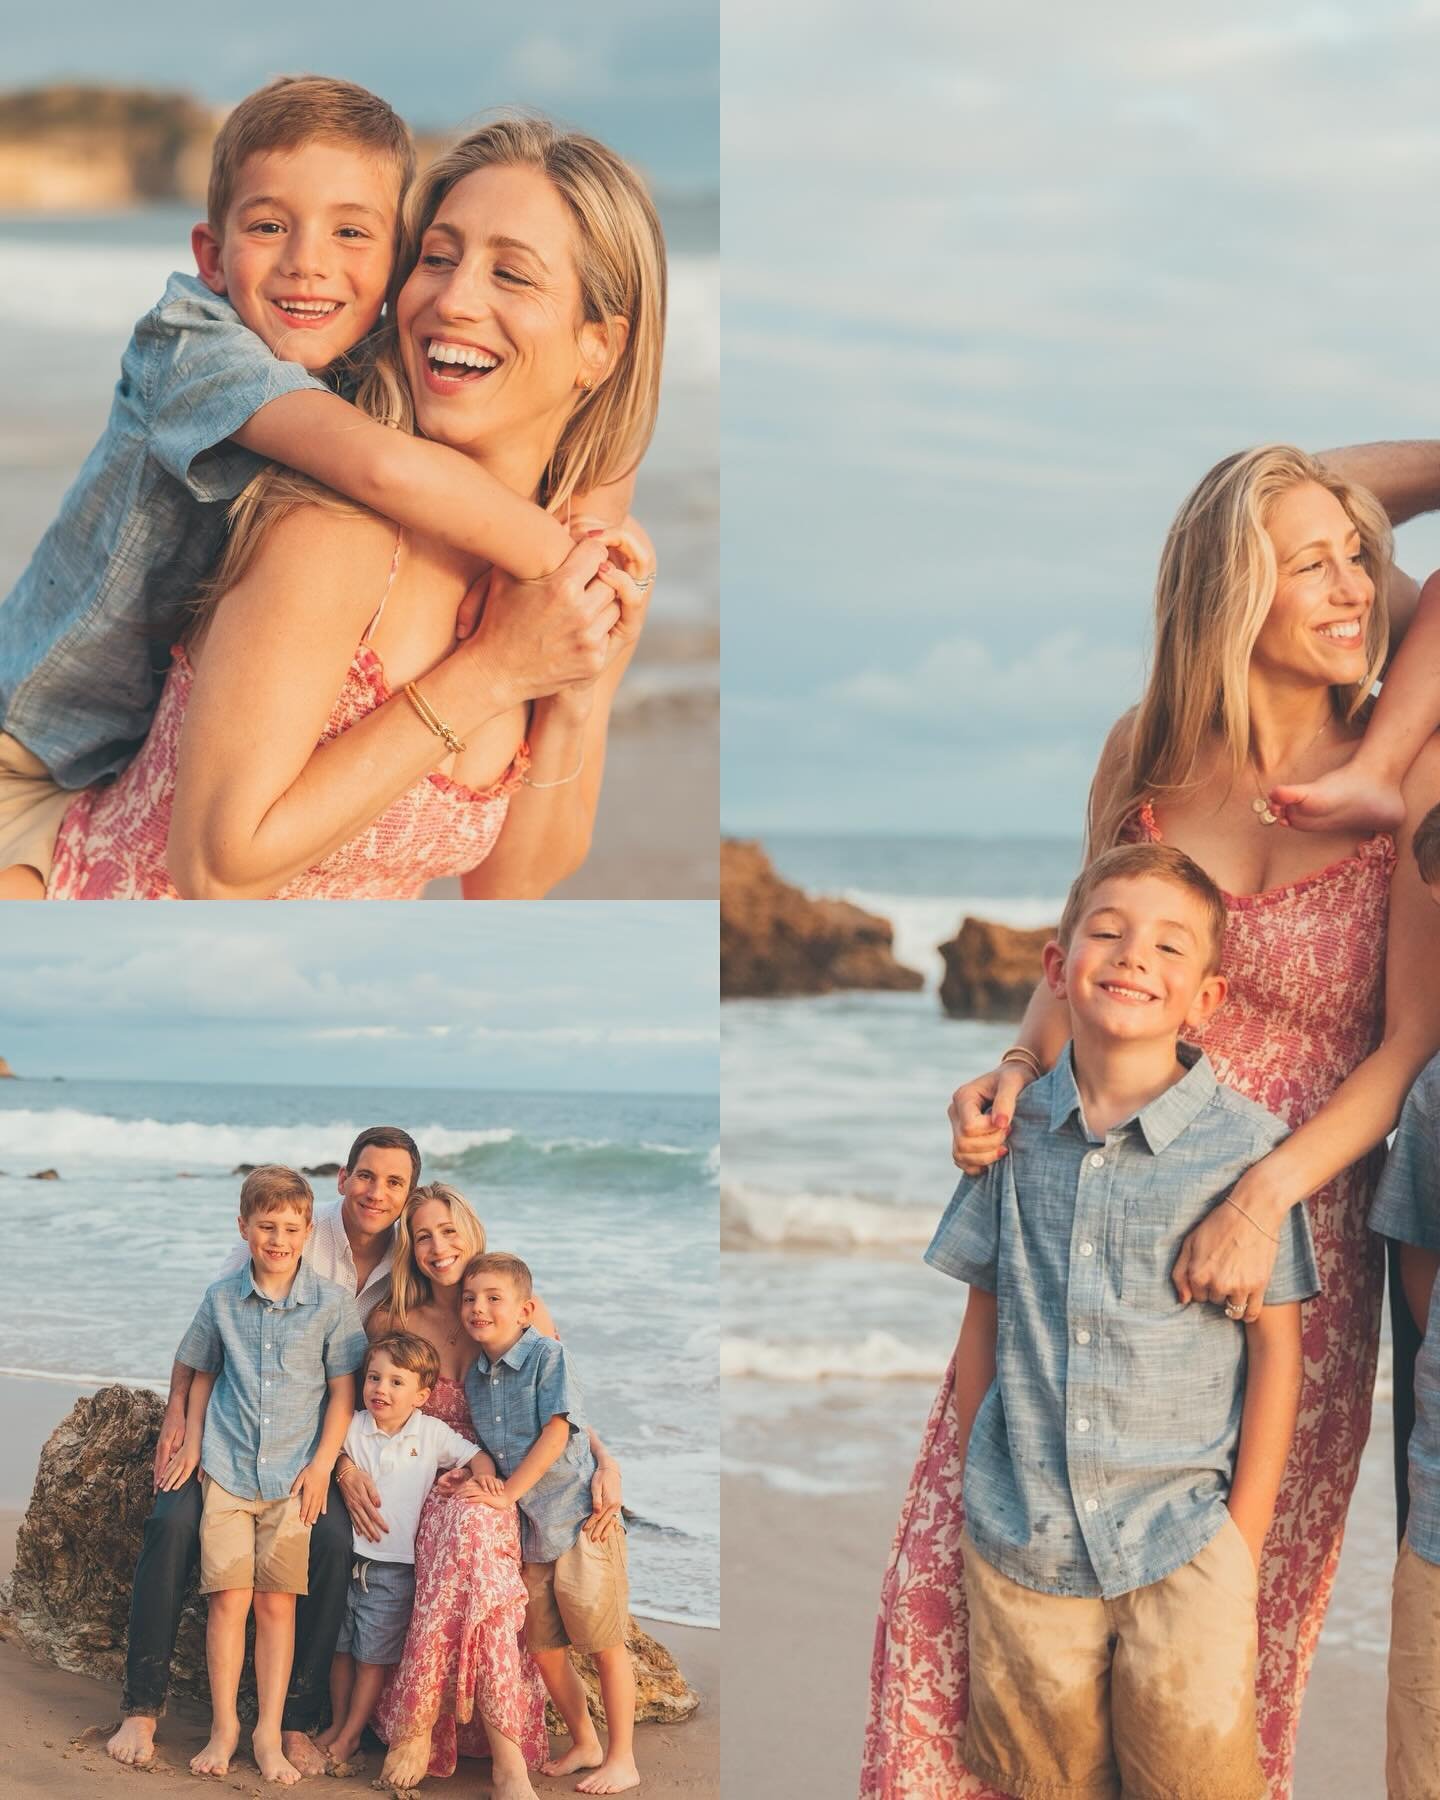 📷 It&rsquo;s always a good idea to take family photos&hellip;especially in the spring when it&rsquo;s quiet at the beach and your kids can run free! 🌊

#NewportBeachFamilyPhotographer
#FamilyPhotographyOC
#NewportBeachKids
#OrangeCountyFamilies
#Fa